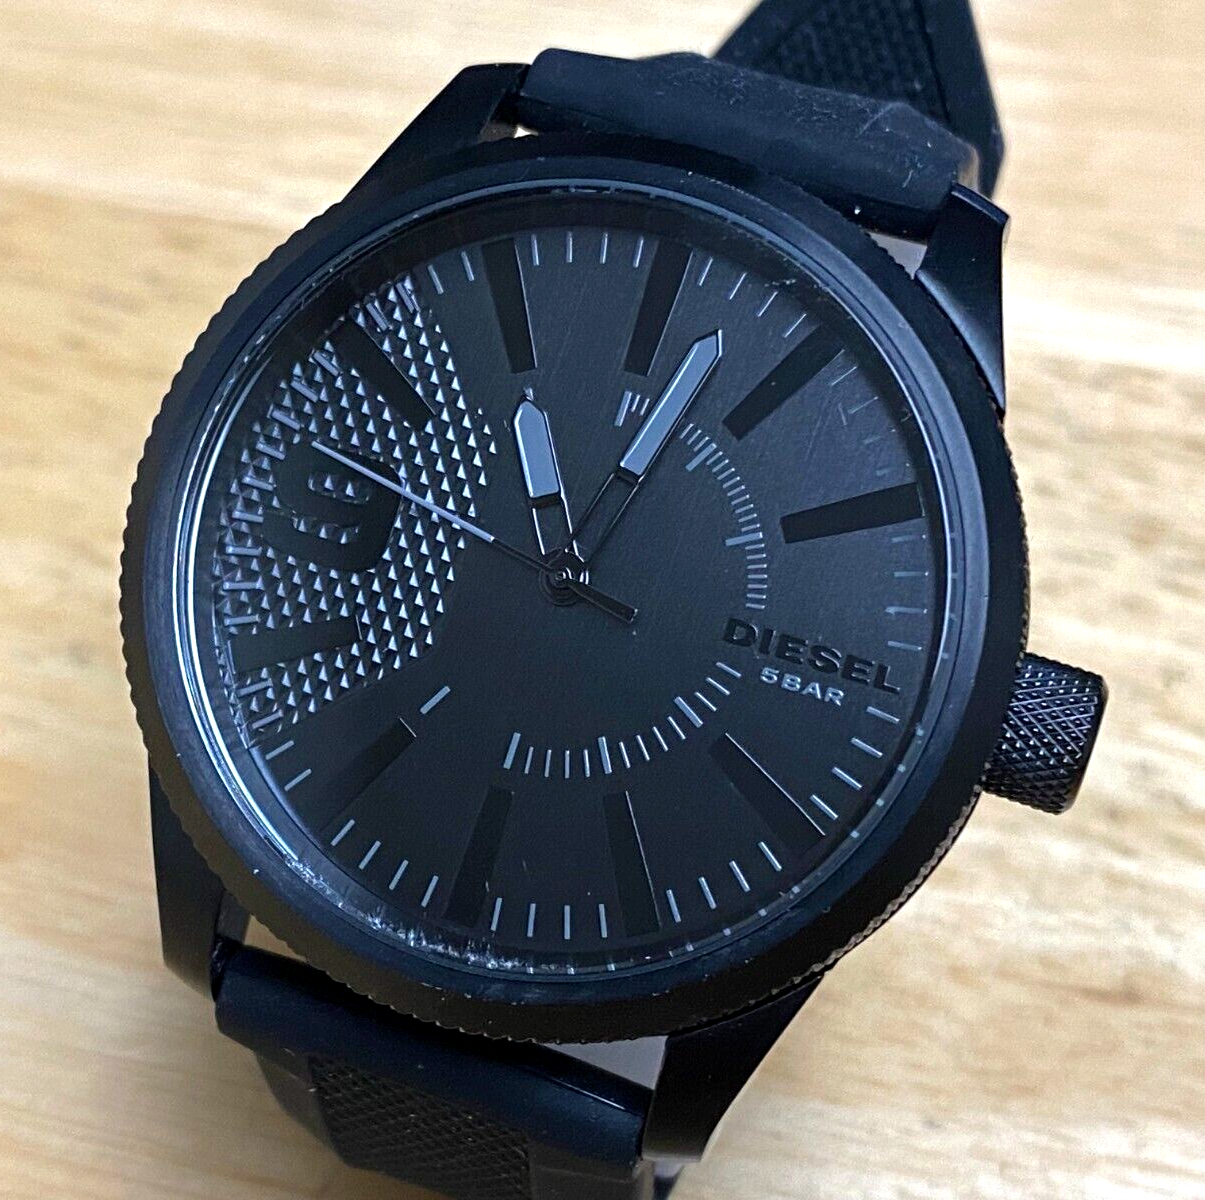 Diesel Watch for Men Rasp, Quartz Movement, 46 mm Black Stainless Steel  Case with a Silicone Strap, DZ1807 : Amazon.co.uk: Fashion